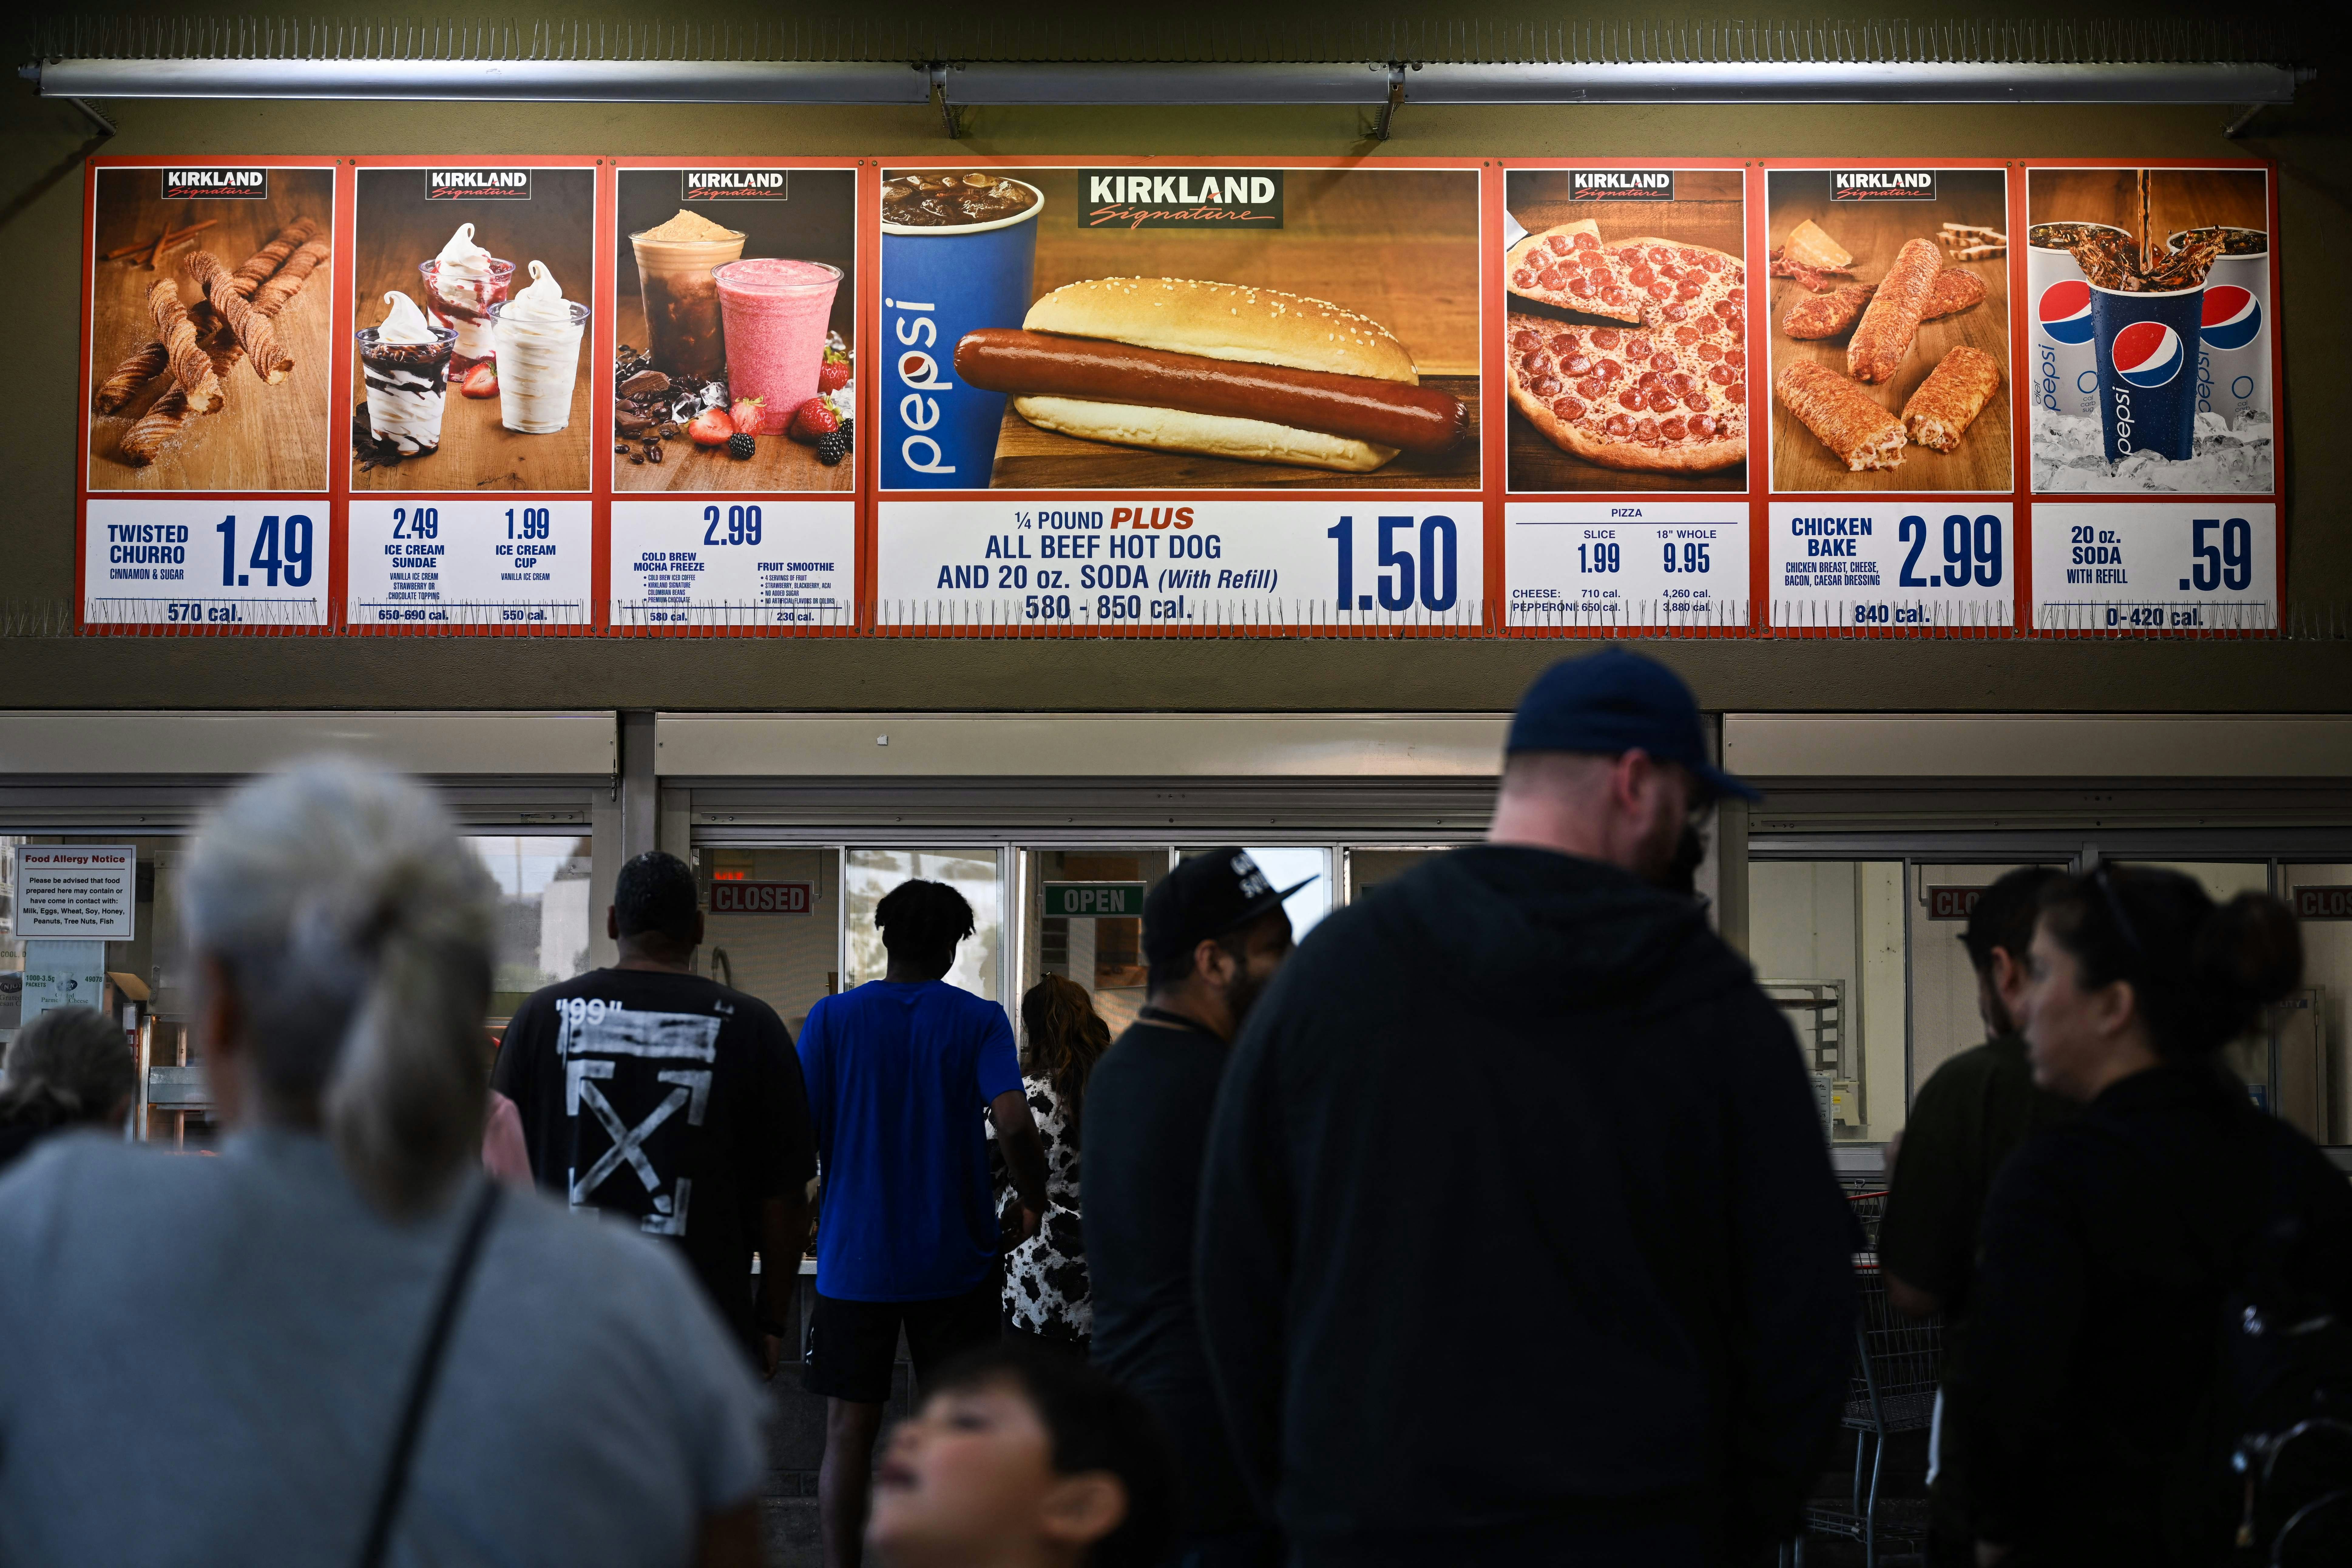 costco-will-begin-to-check-memberships-in-all-of-their-food-courts